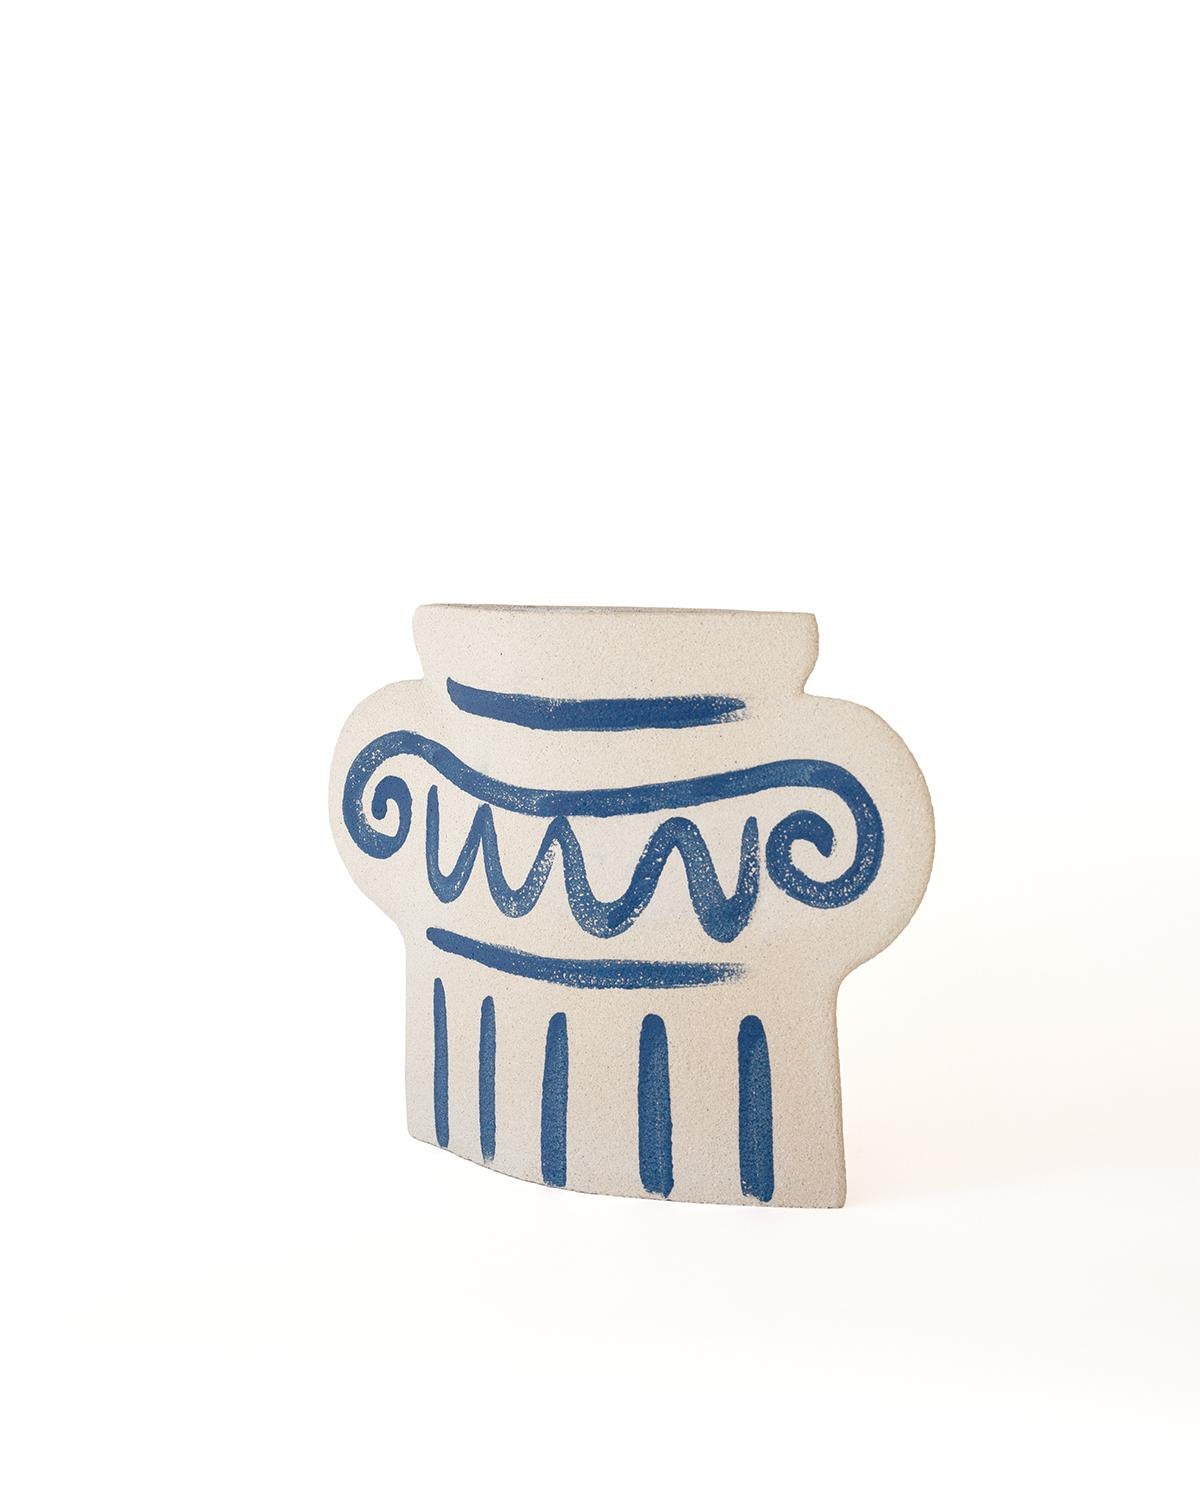 A part of a captivating new line blending ancient Greek pottery with contemporary design, the ‘Greek Column’ vase showcases delicate blue underglaze illustrations that harmonize traditional and modern aesthetics.
Crafted by our designer, the blue